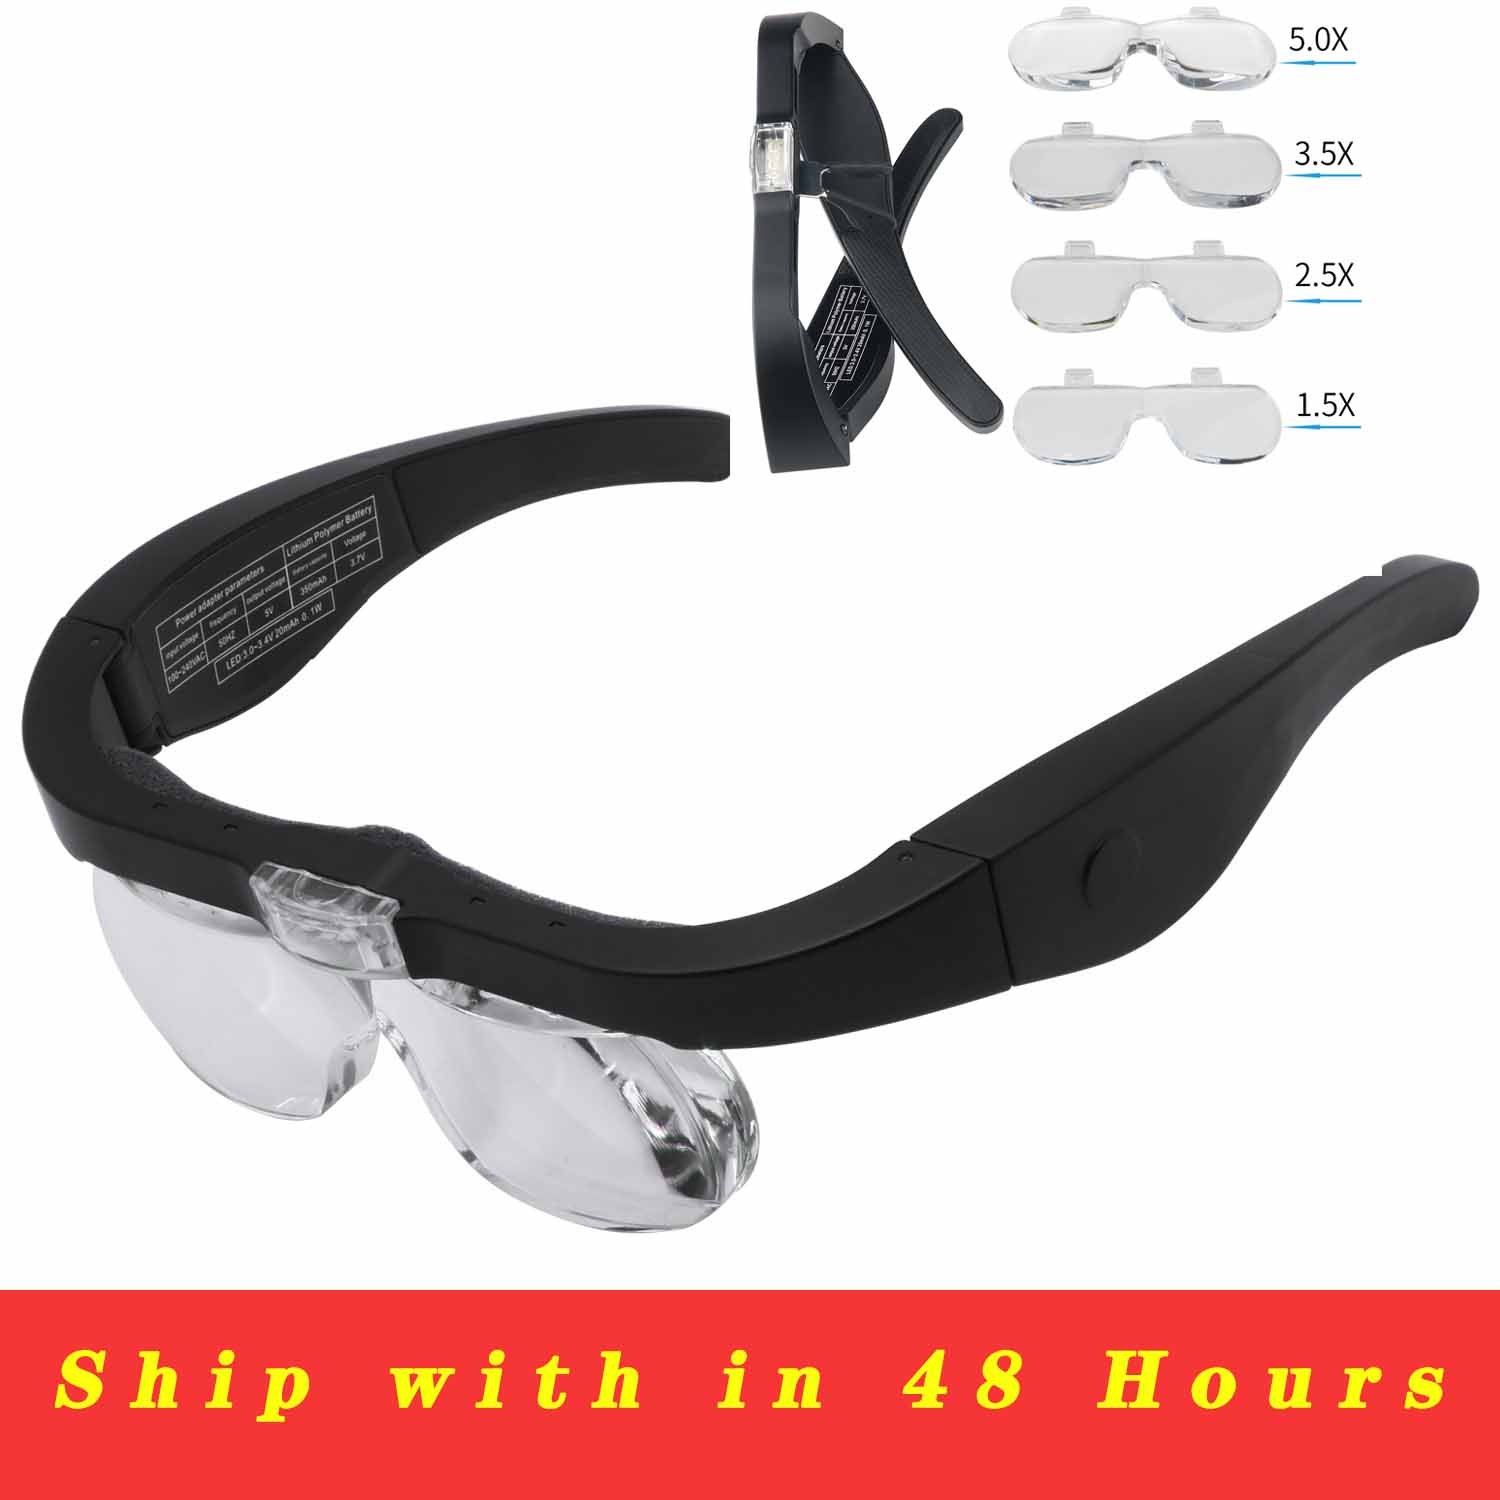 Magnifying Glasses Magnifying Glasses 1.5x 2.5X 3.5X 5.0X USB Rechargeable With LED Light For Reading Jewelry Watches Repair Wearing